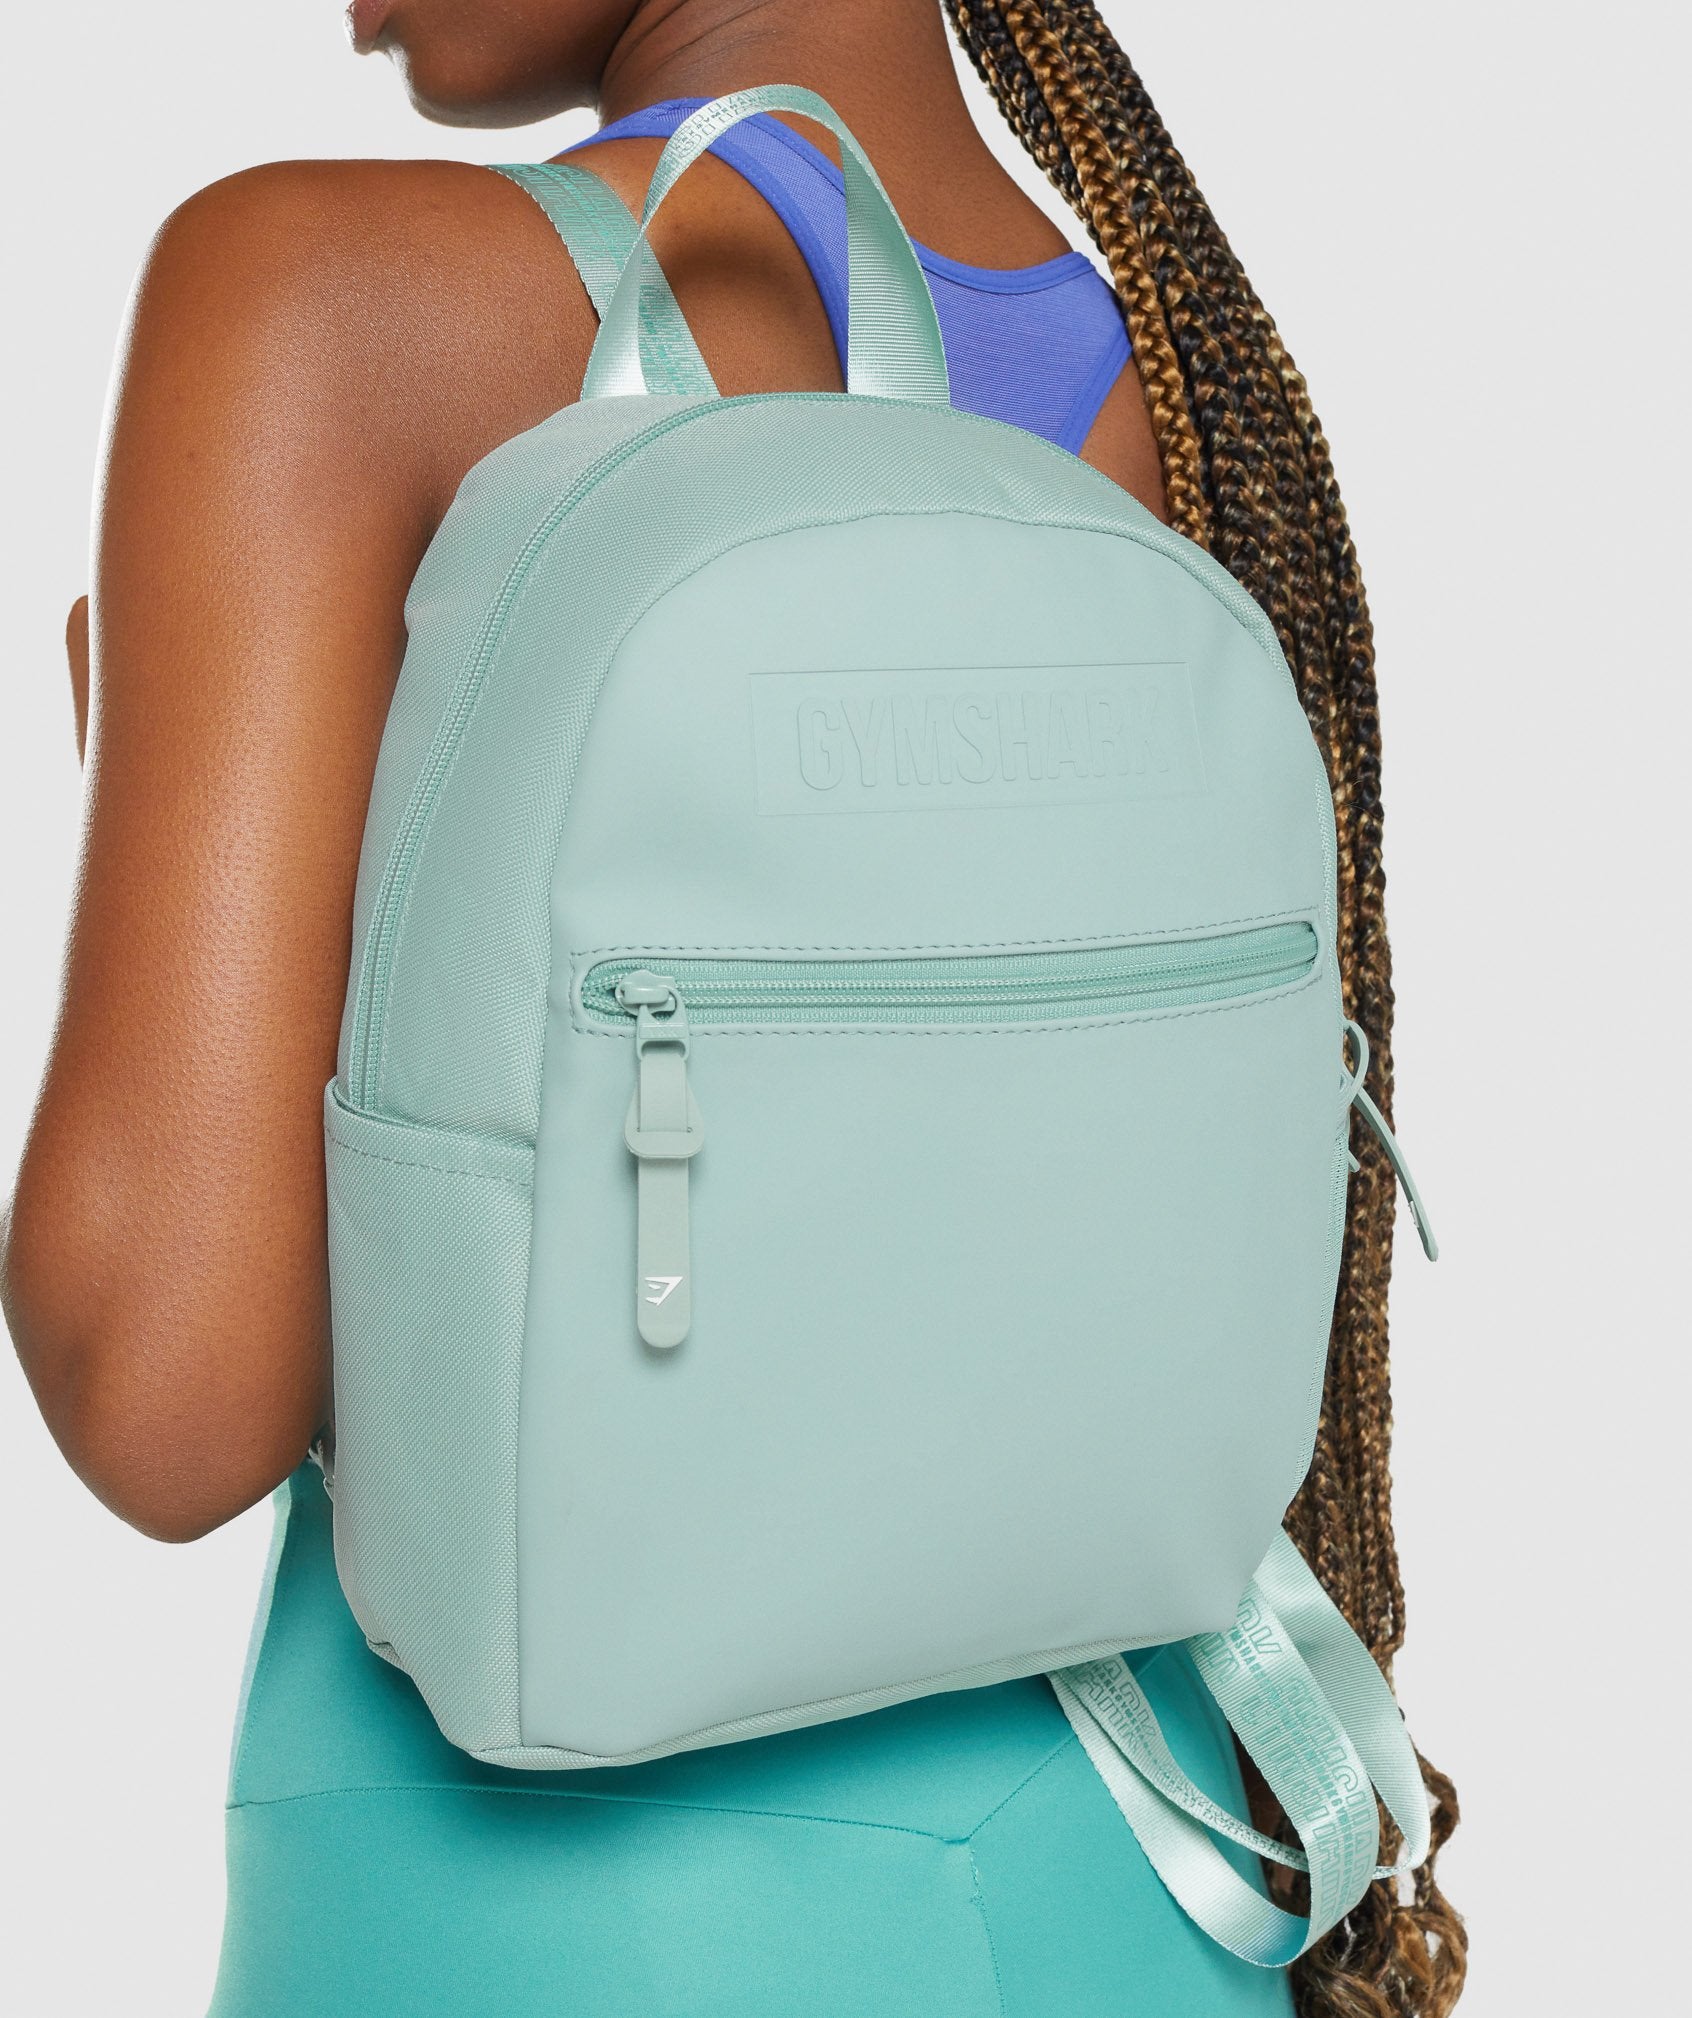 Gymshark Mini Backpack - $30 (33% Off Retail) New With Tags